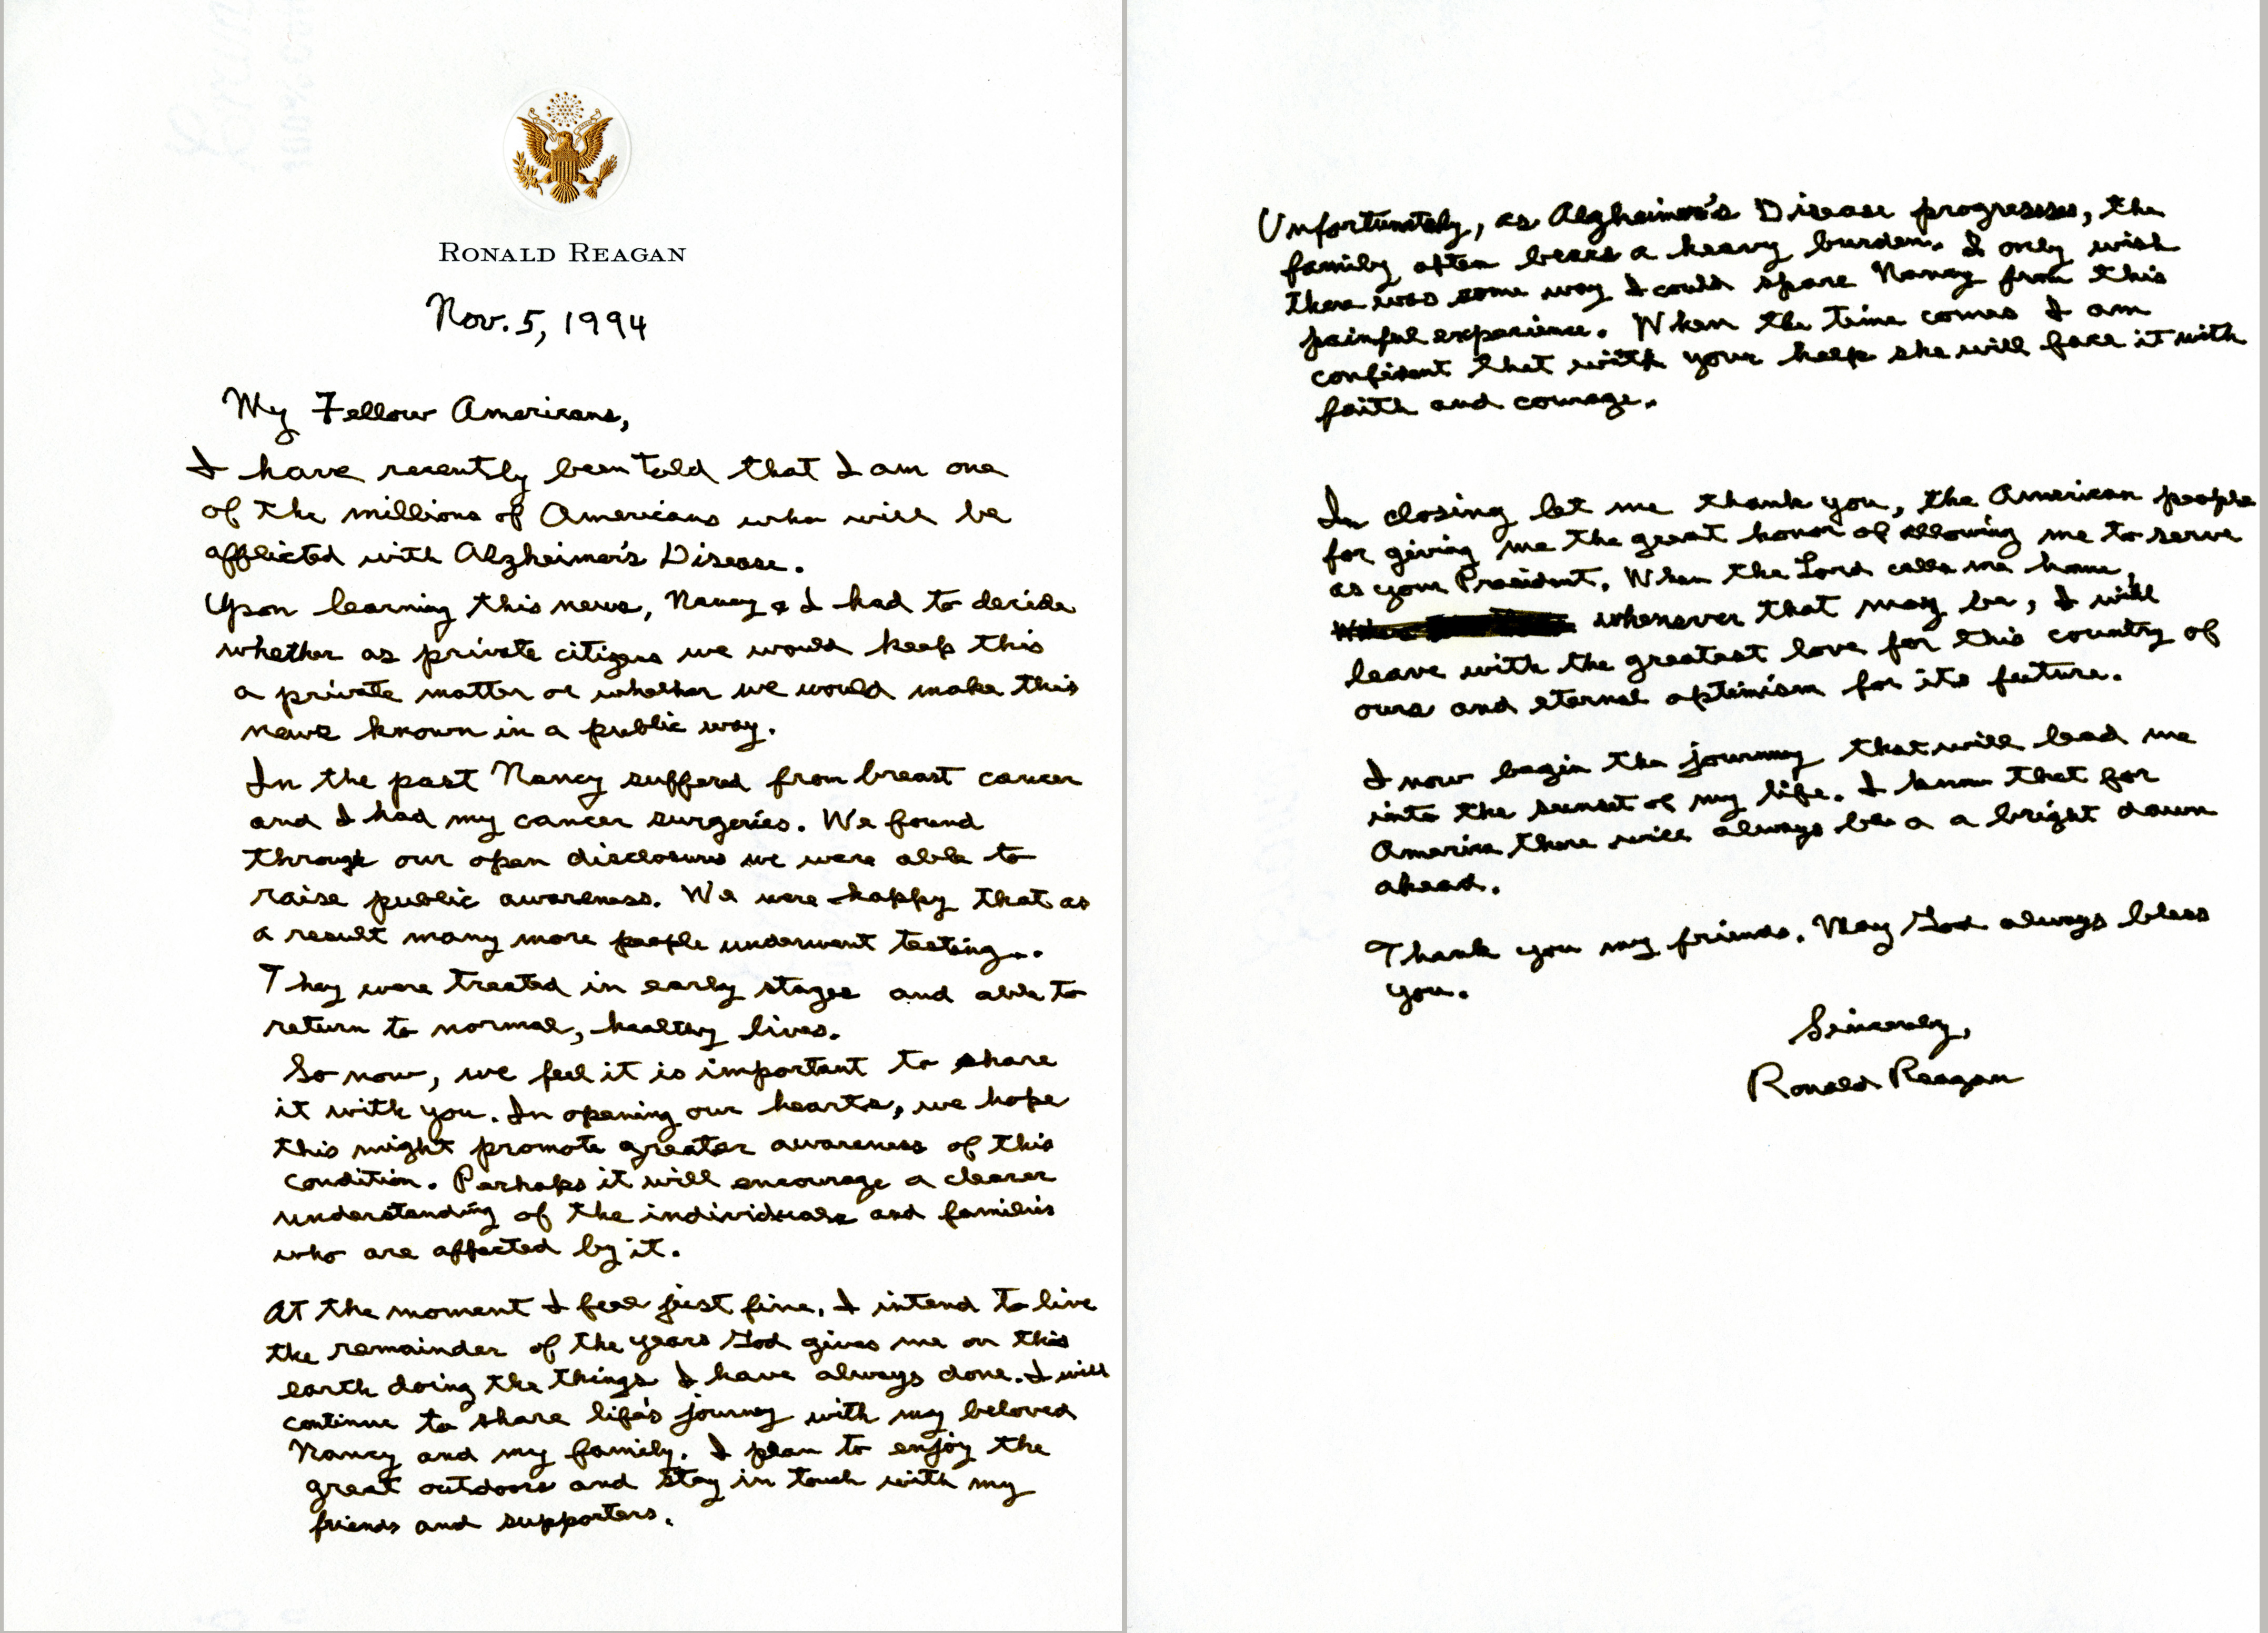 President Reagan's letter to the American people (Courtesy of the Ronald Reagan Presidential Foundation and Library)